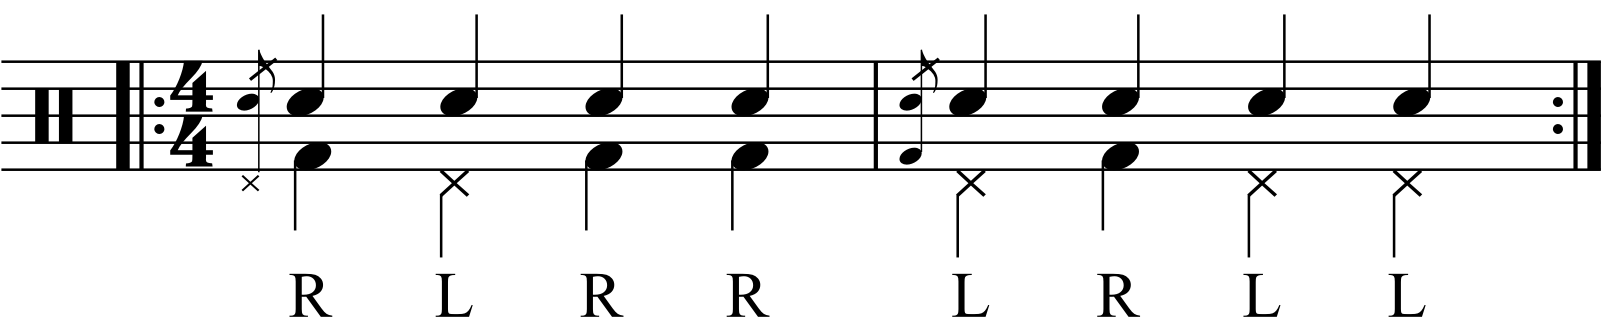 The quarter note exercise with hi hats.